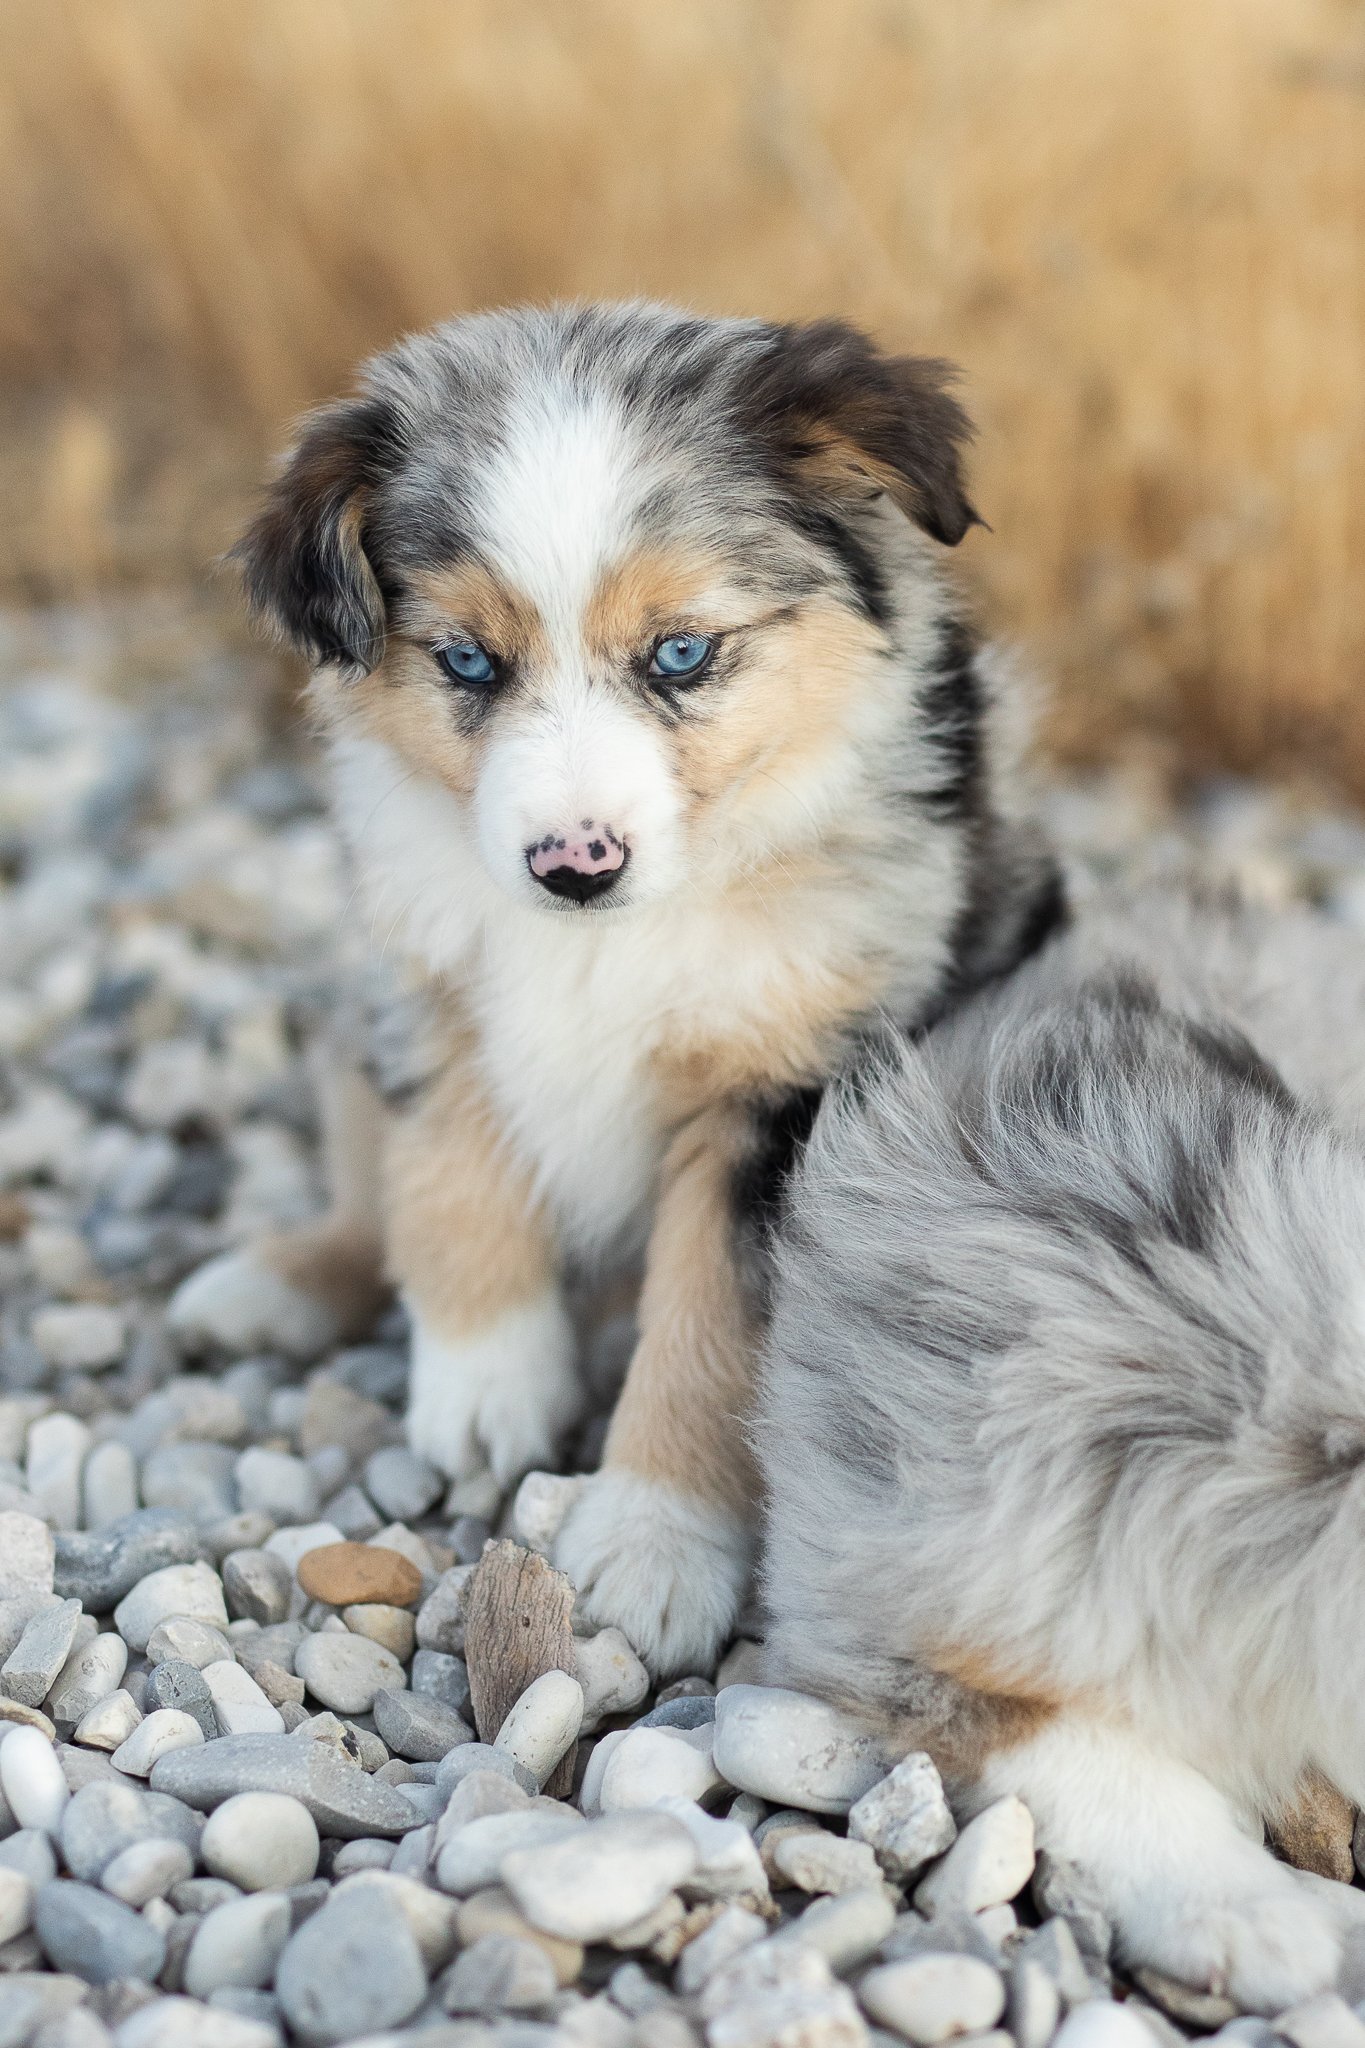 IV. Temperament and personality traits of the Australian Shepherd